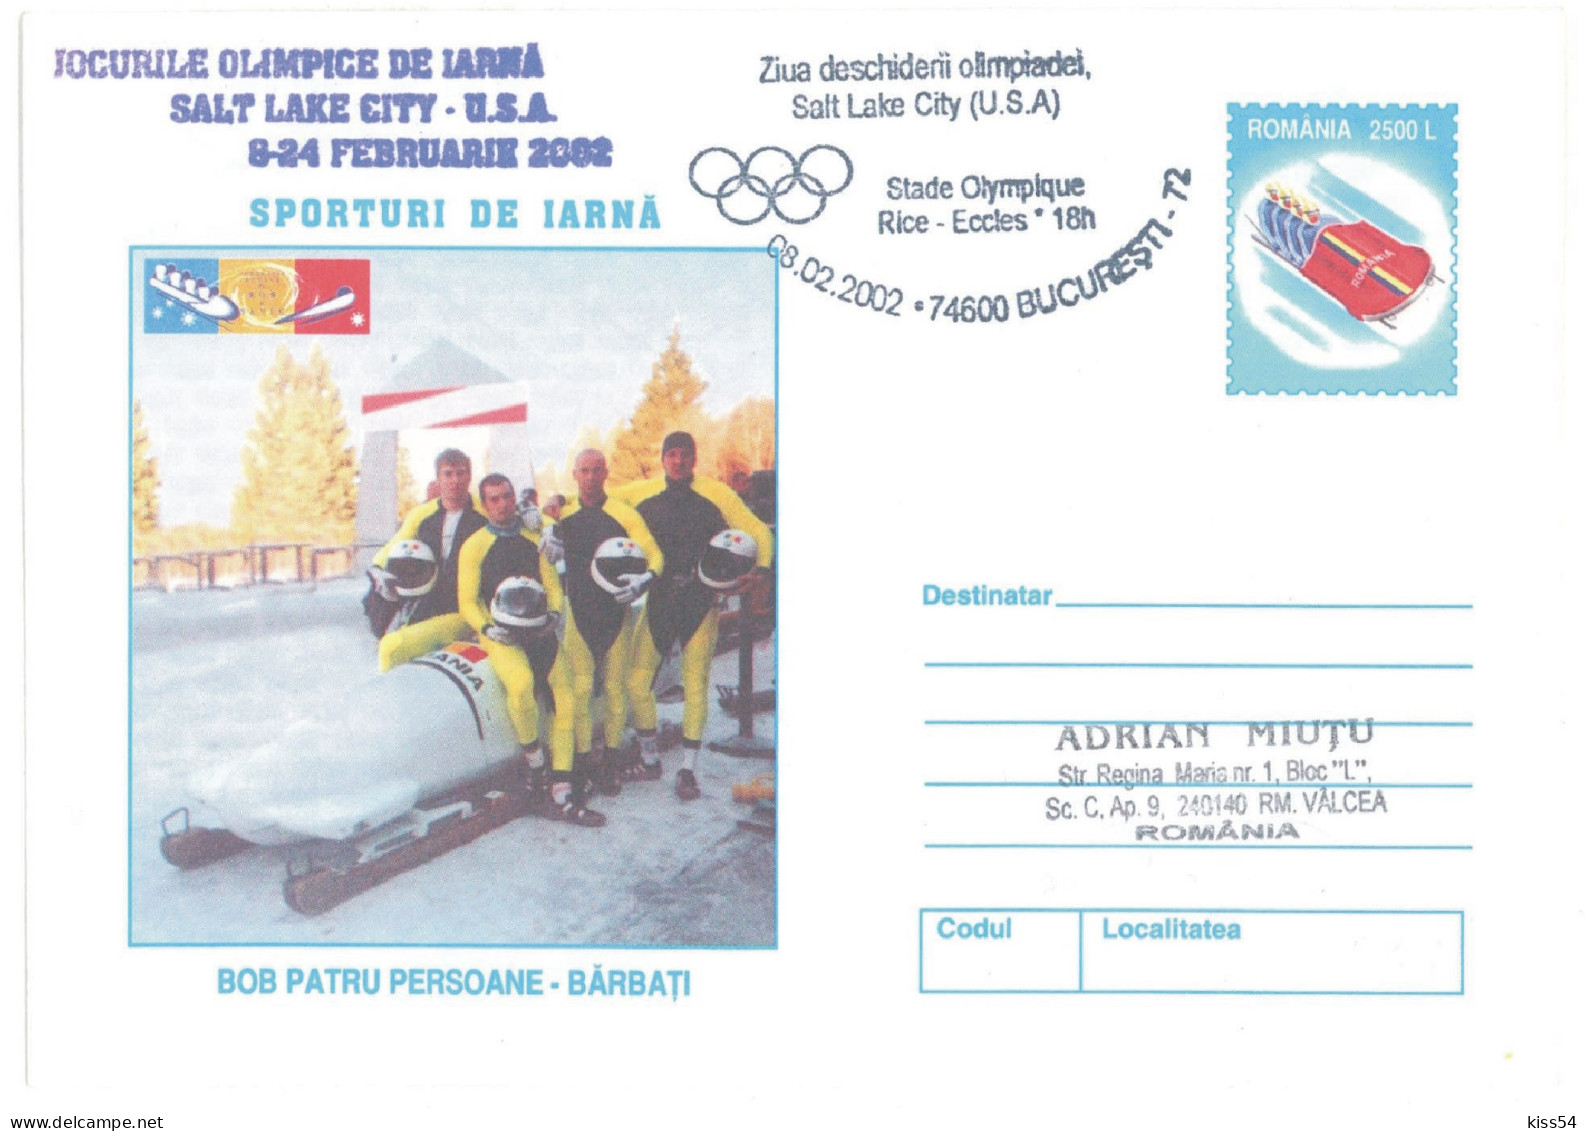 IP 2001 - 0226a U. S. A. SALT LAKE CITY 2002 - 4 BOBSLEIGHT MEN - Winter Olympic Games - Stationery - Used - 2001 - Hiver 2002: Salt Lake City